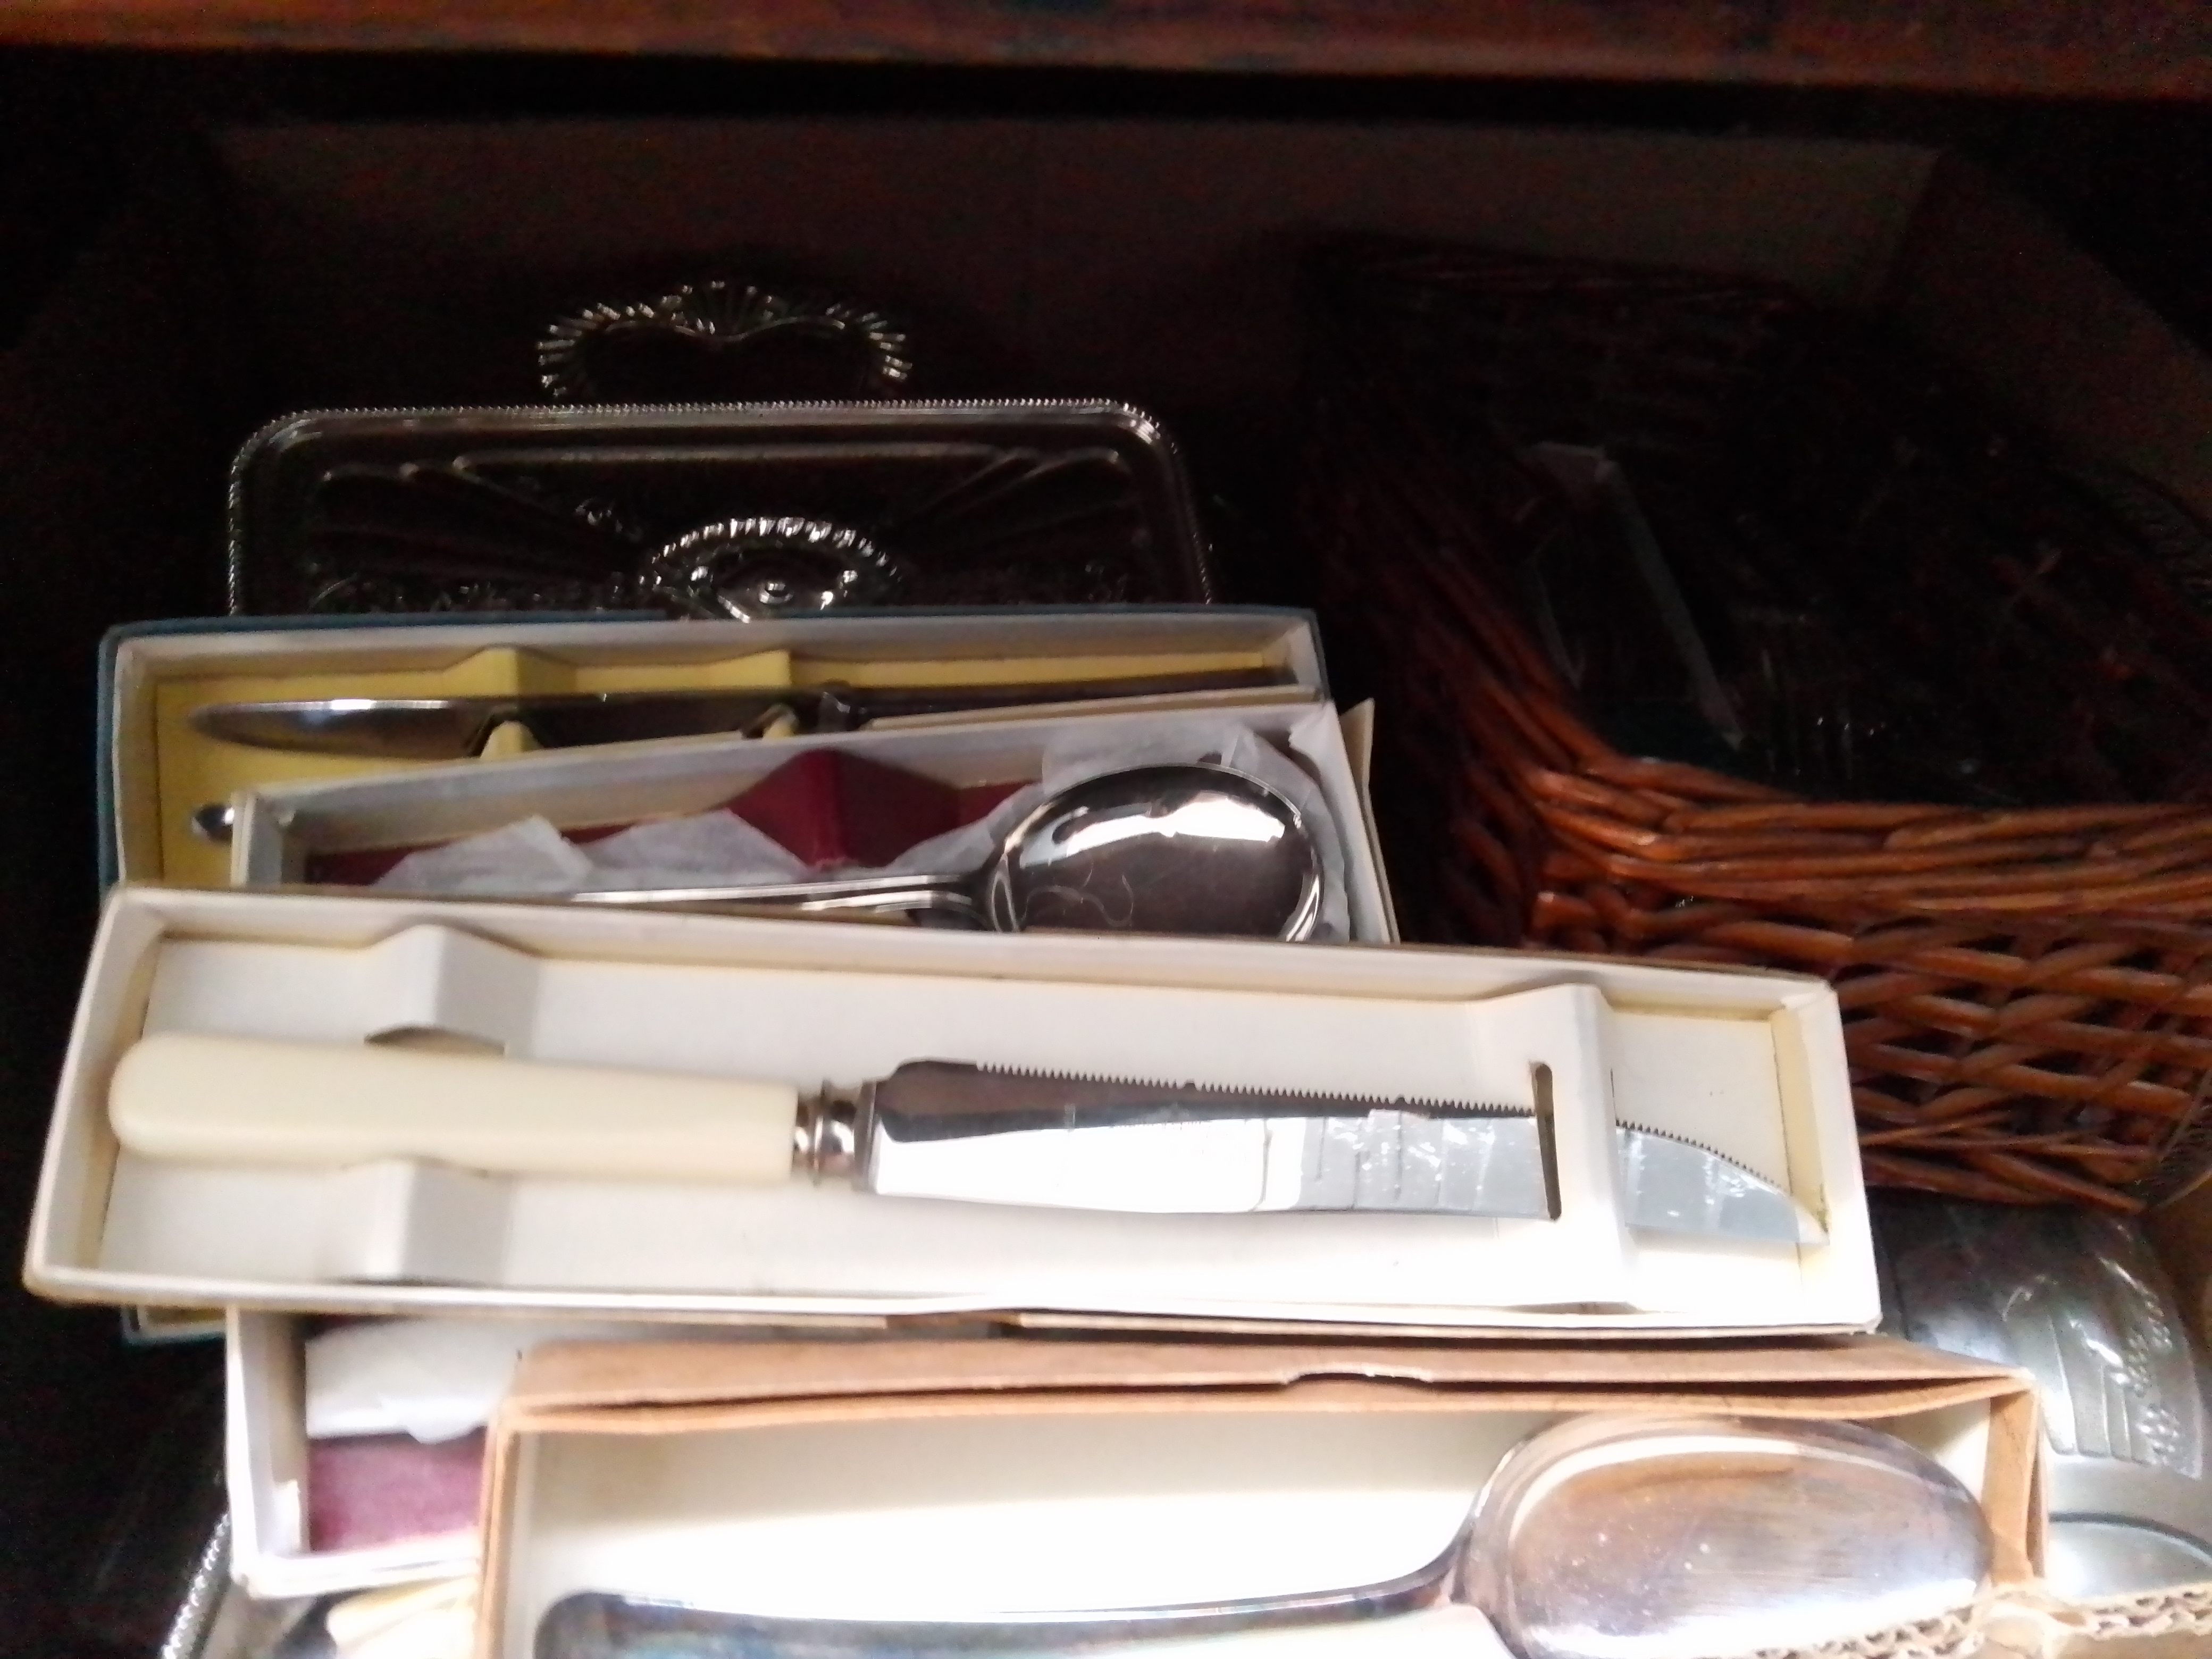 Assorted metal wares including boxed cutlery